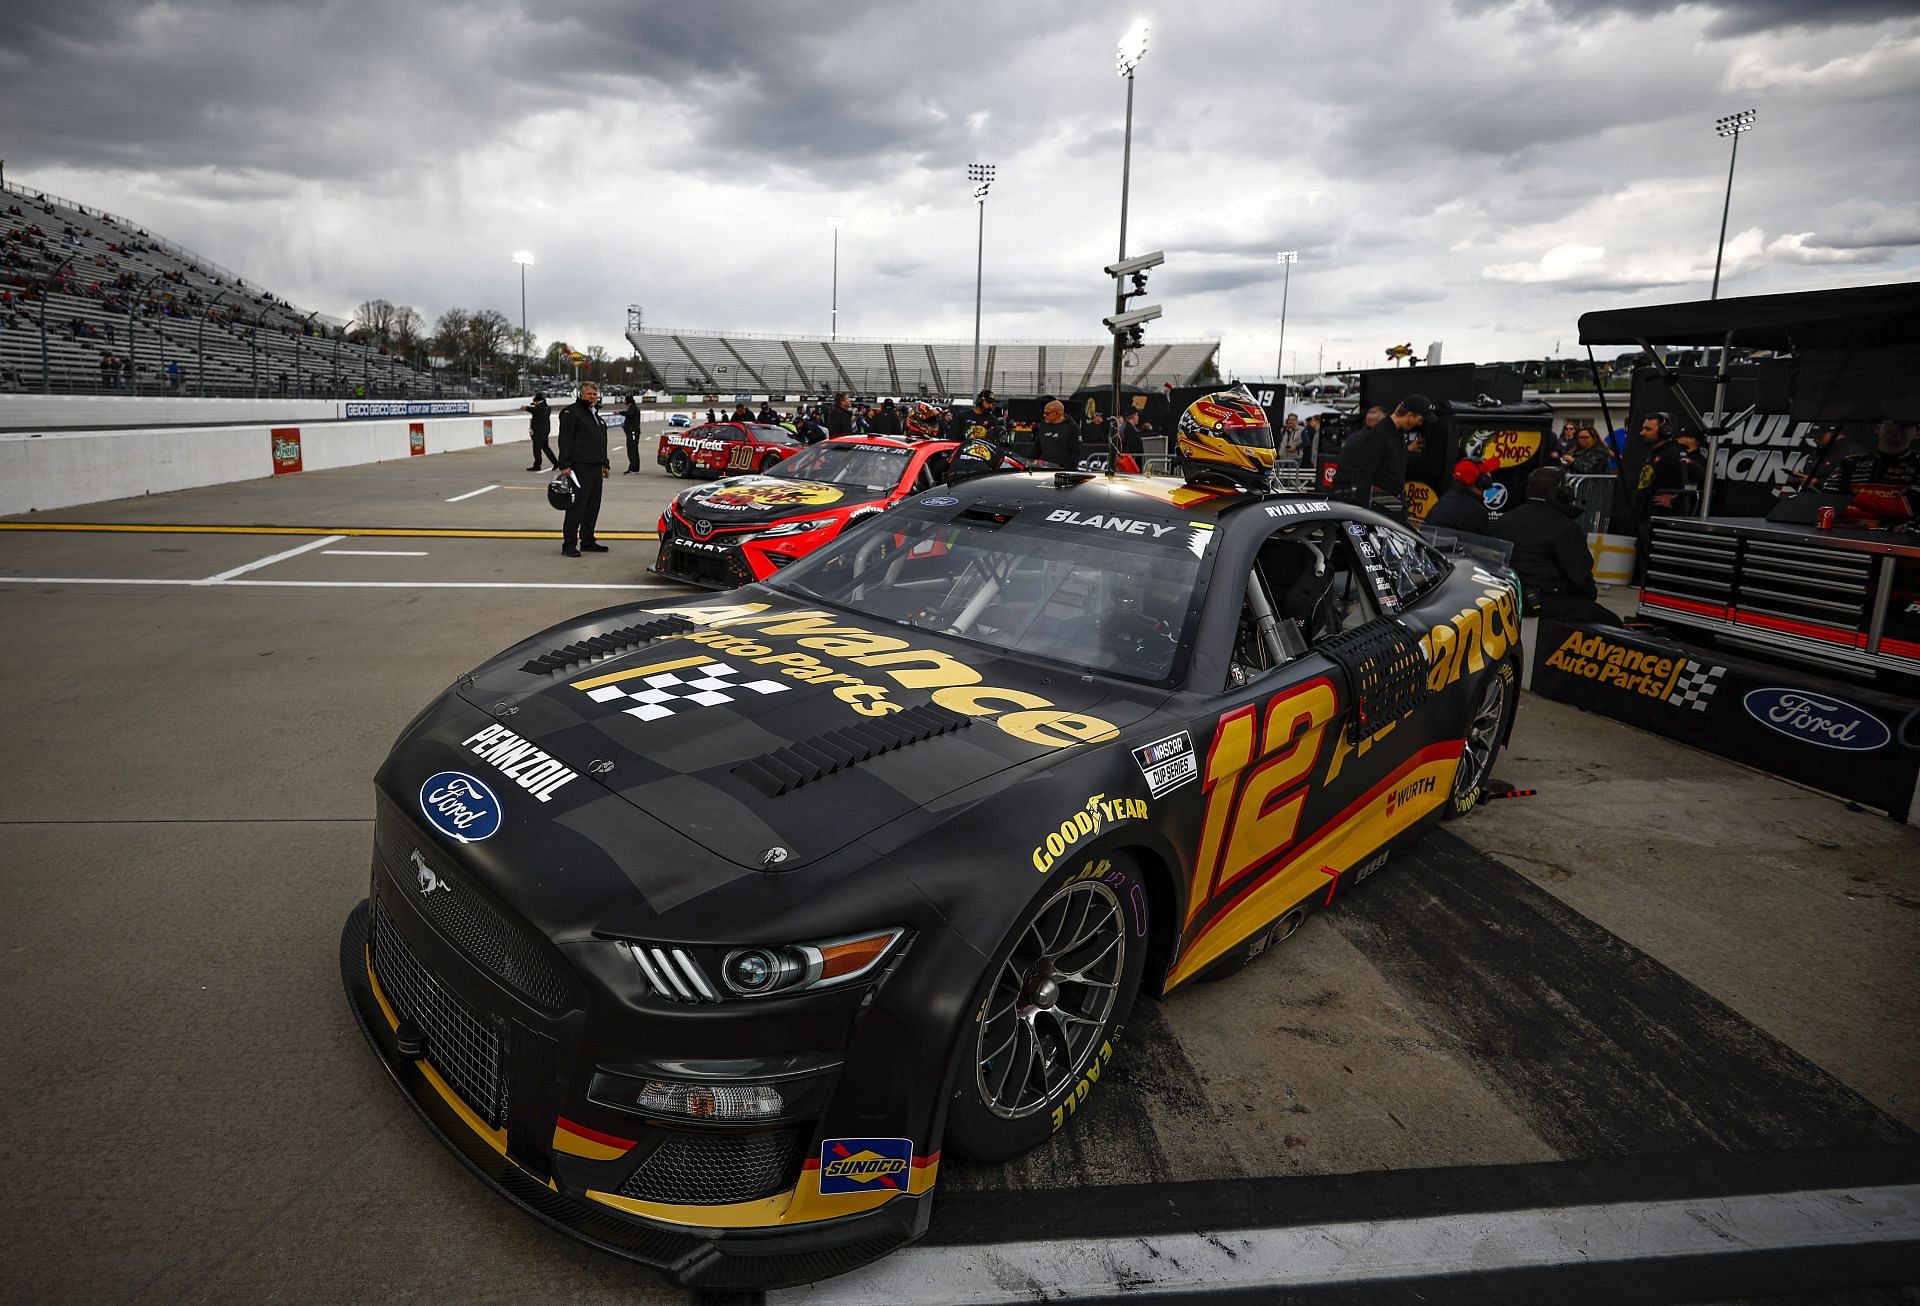 Ryan Blaney&#039;s No. 12 Advance Auto Parts Ford during qualifying for the 2022 NASCAR Cup Series Blue-Emu Maximum Pain Relief 400 at Martinsville Speedway in Virginia. (Photo by Jared C. Tilton/Getty Images)